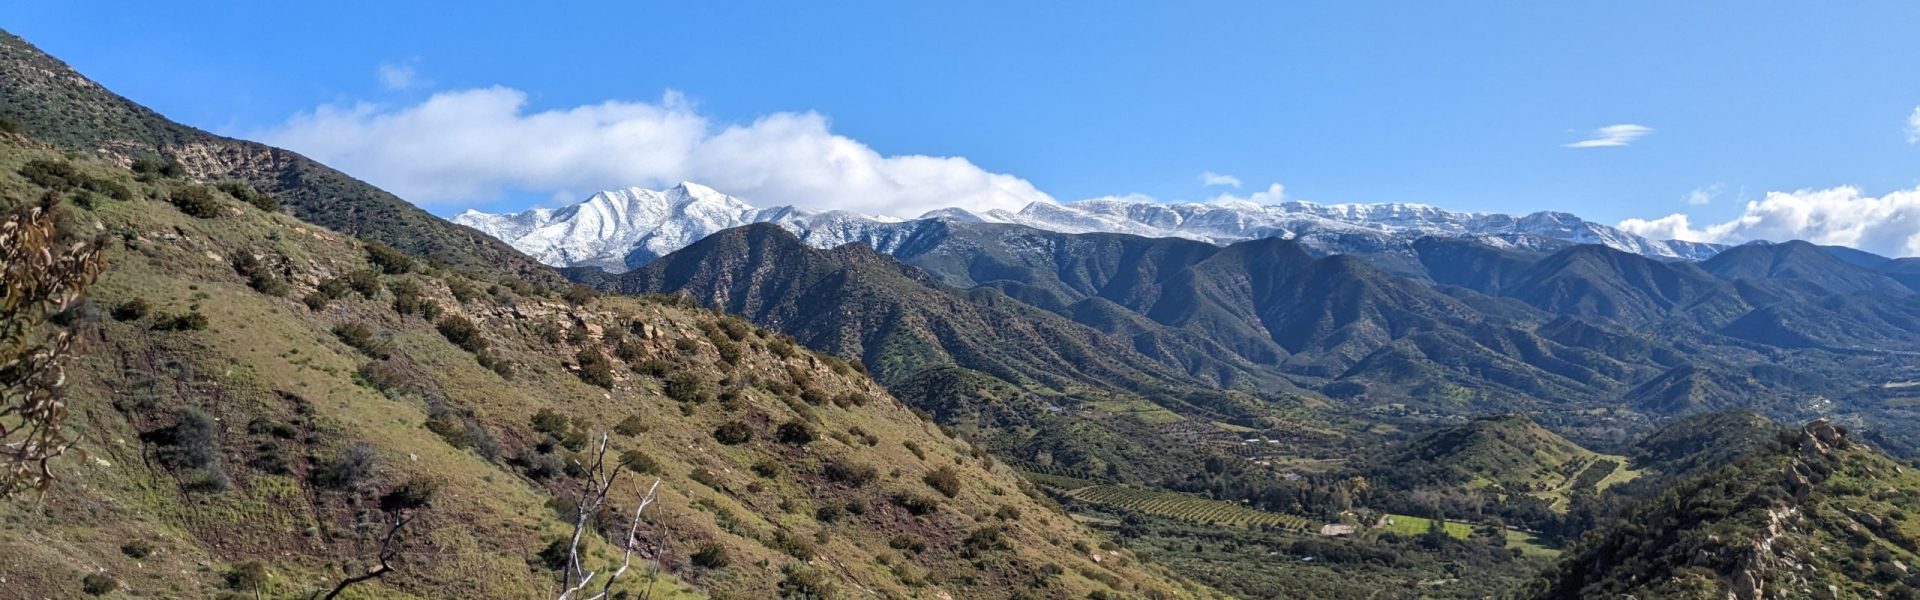 Landscape photograph of the Ojai Valley. Chief's peak is covered in snow.